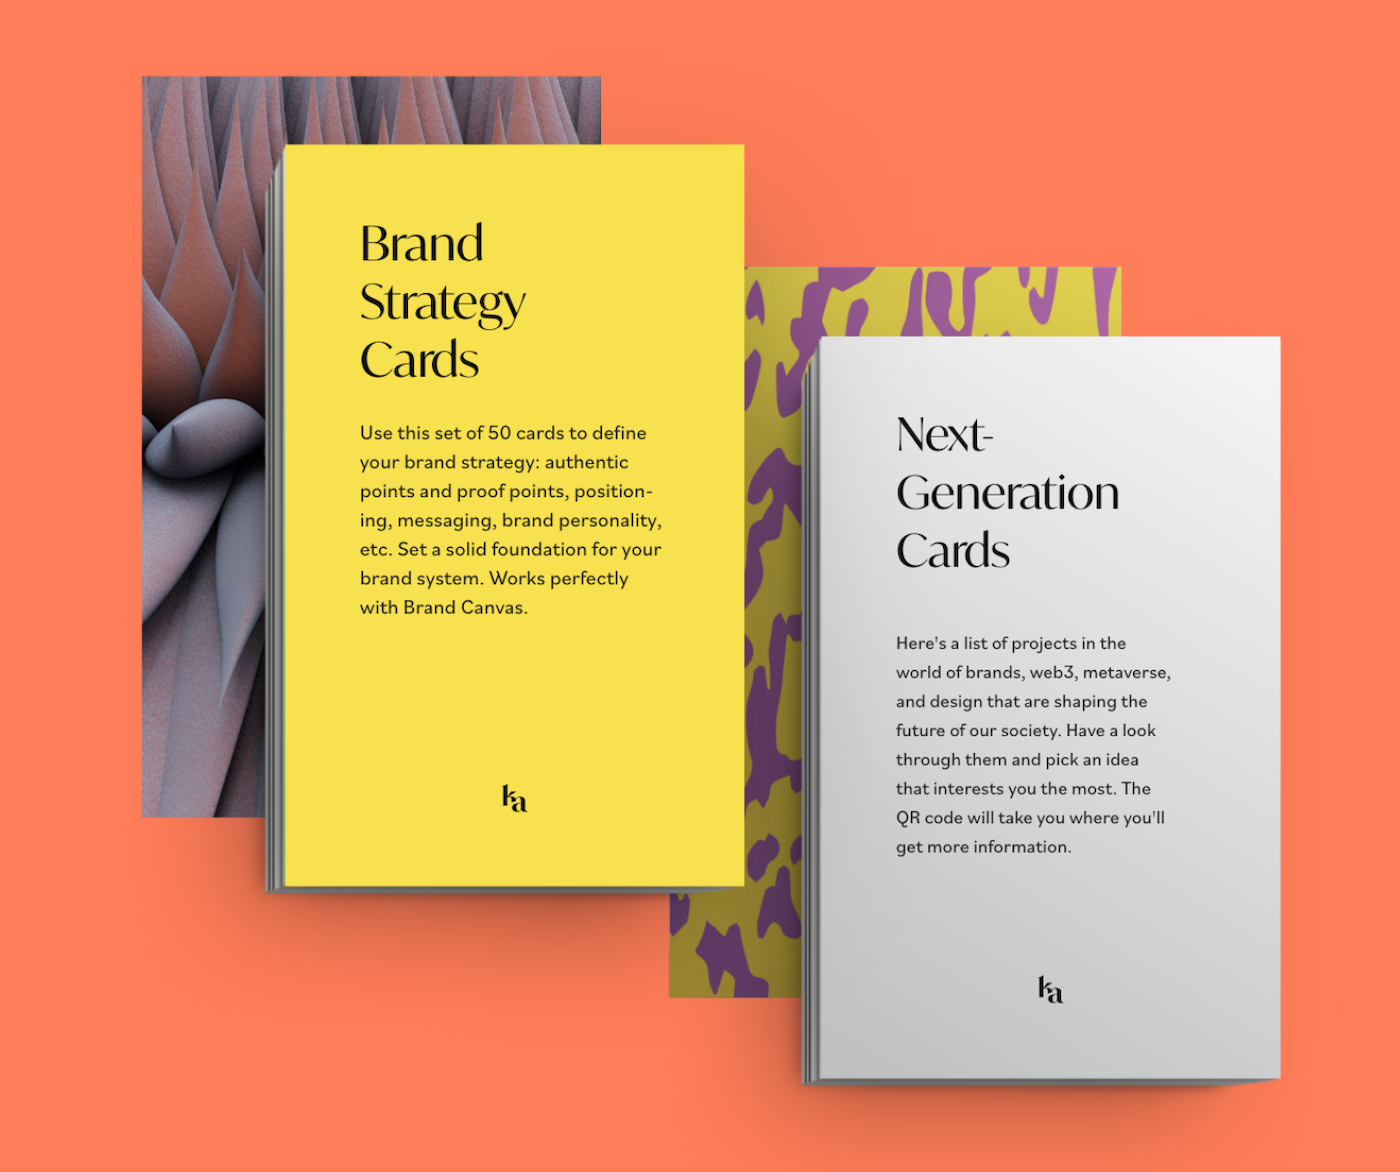 Brand Strategy Cards